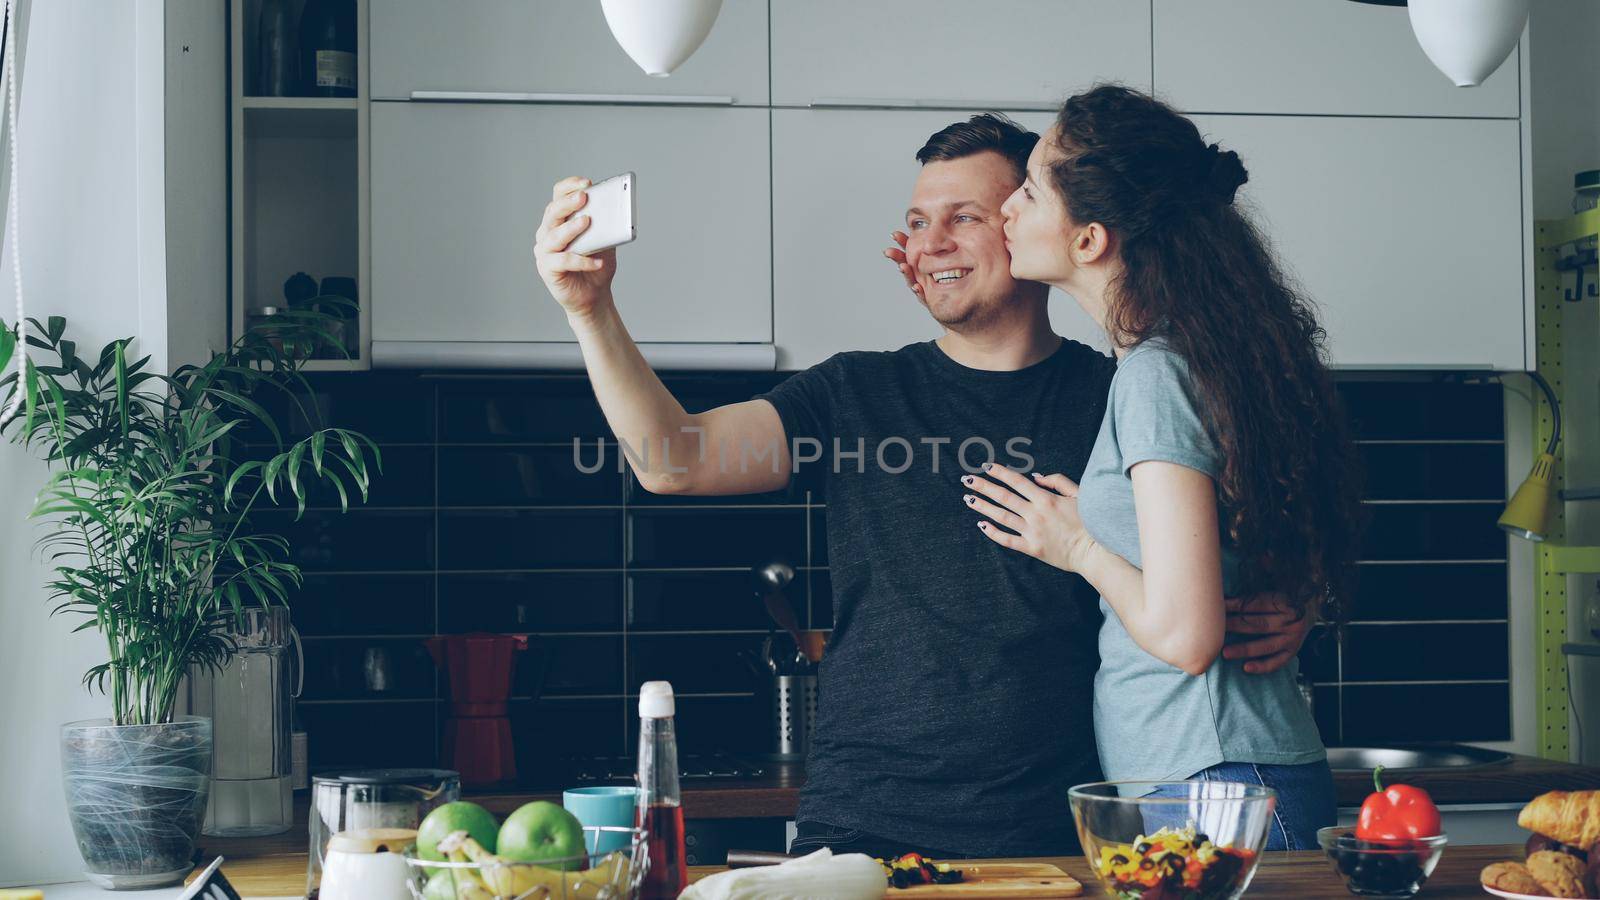 Young funny couple taking self portrait with smartphone camera while cooking in the kitchen at home in the morning